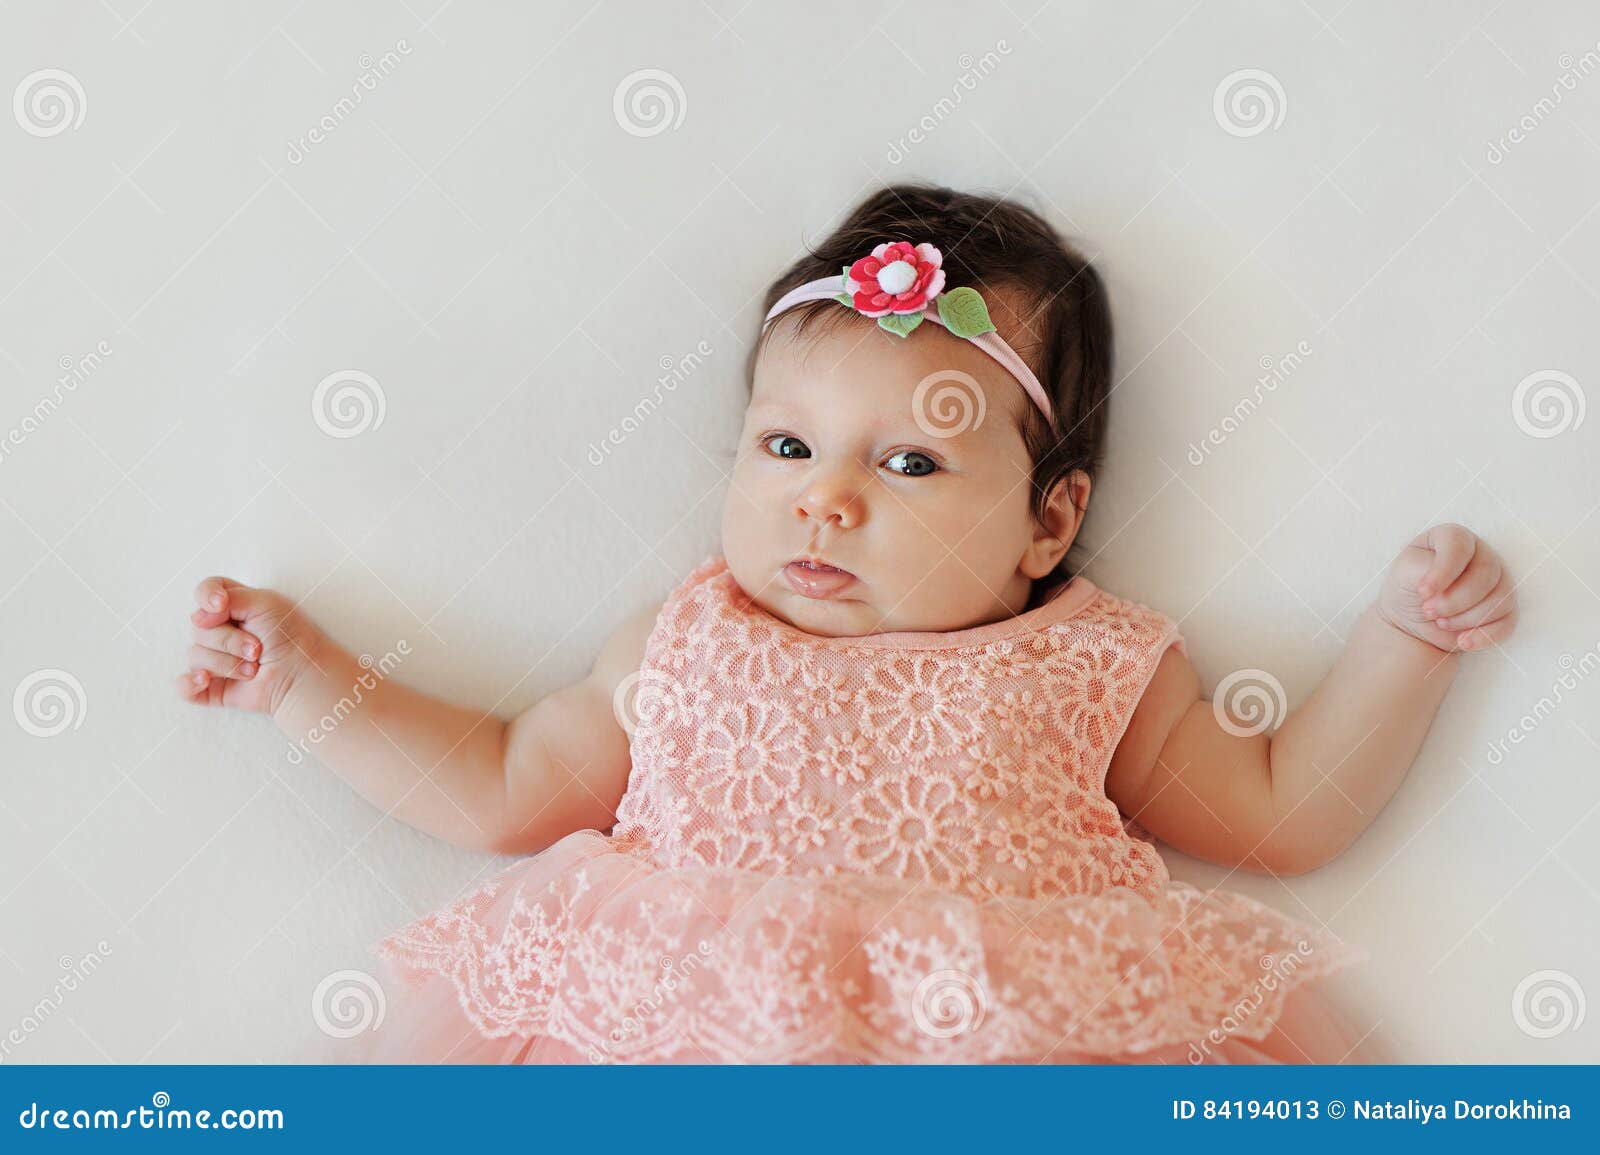 Small Very Cute Wide-eyed Smiling Baby Girl in a Pink Dress Lying ...